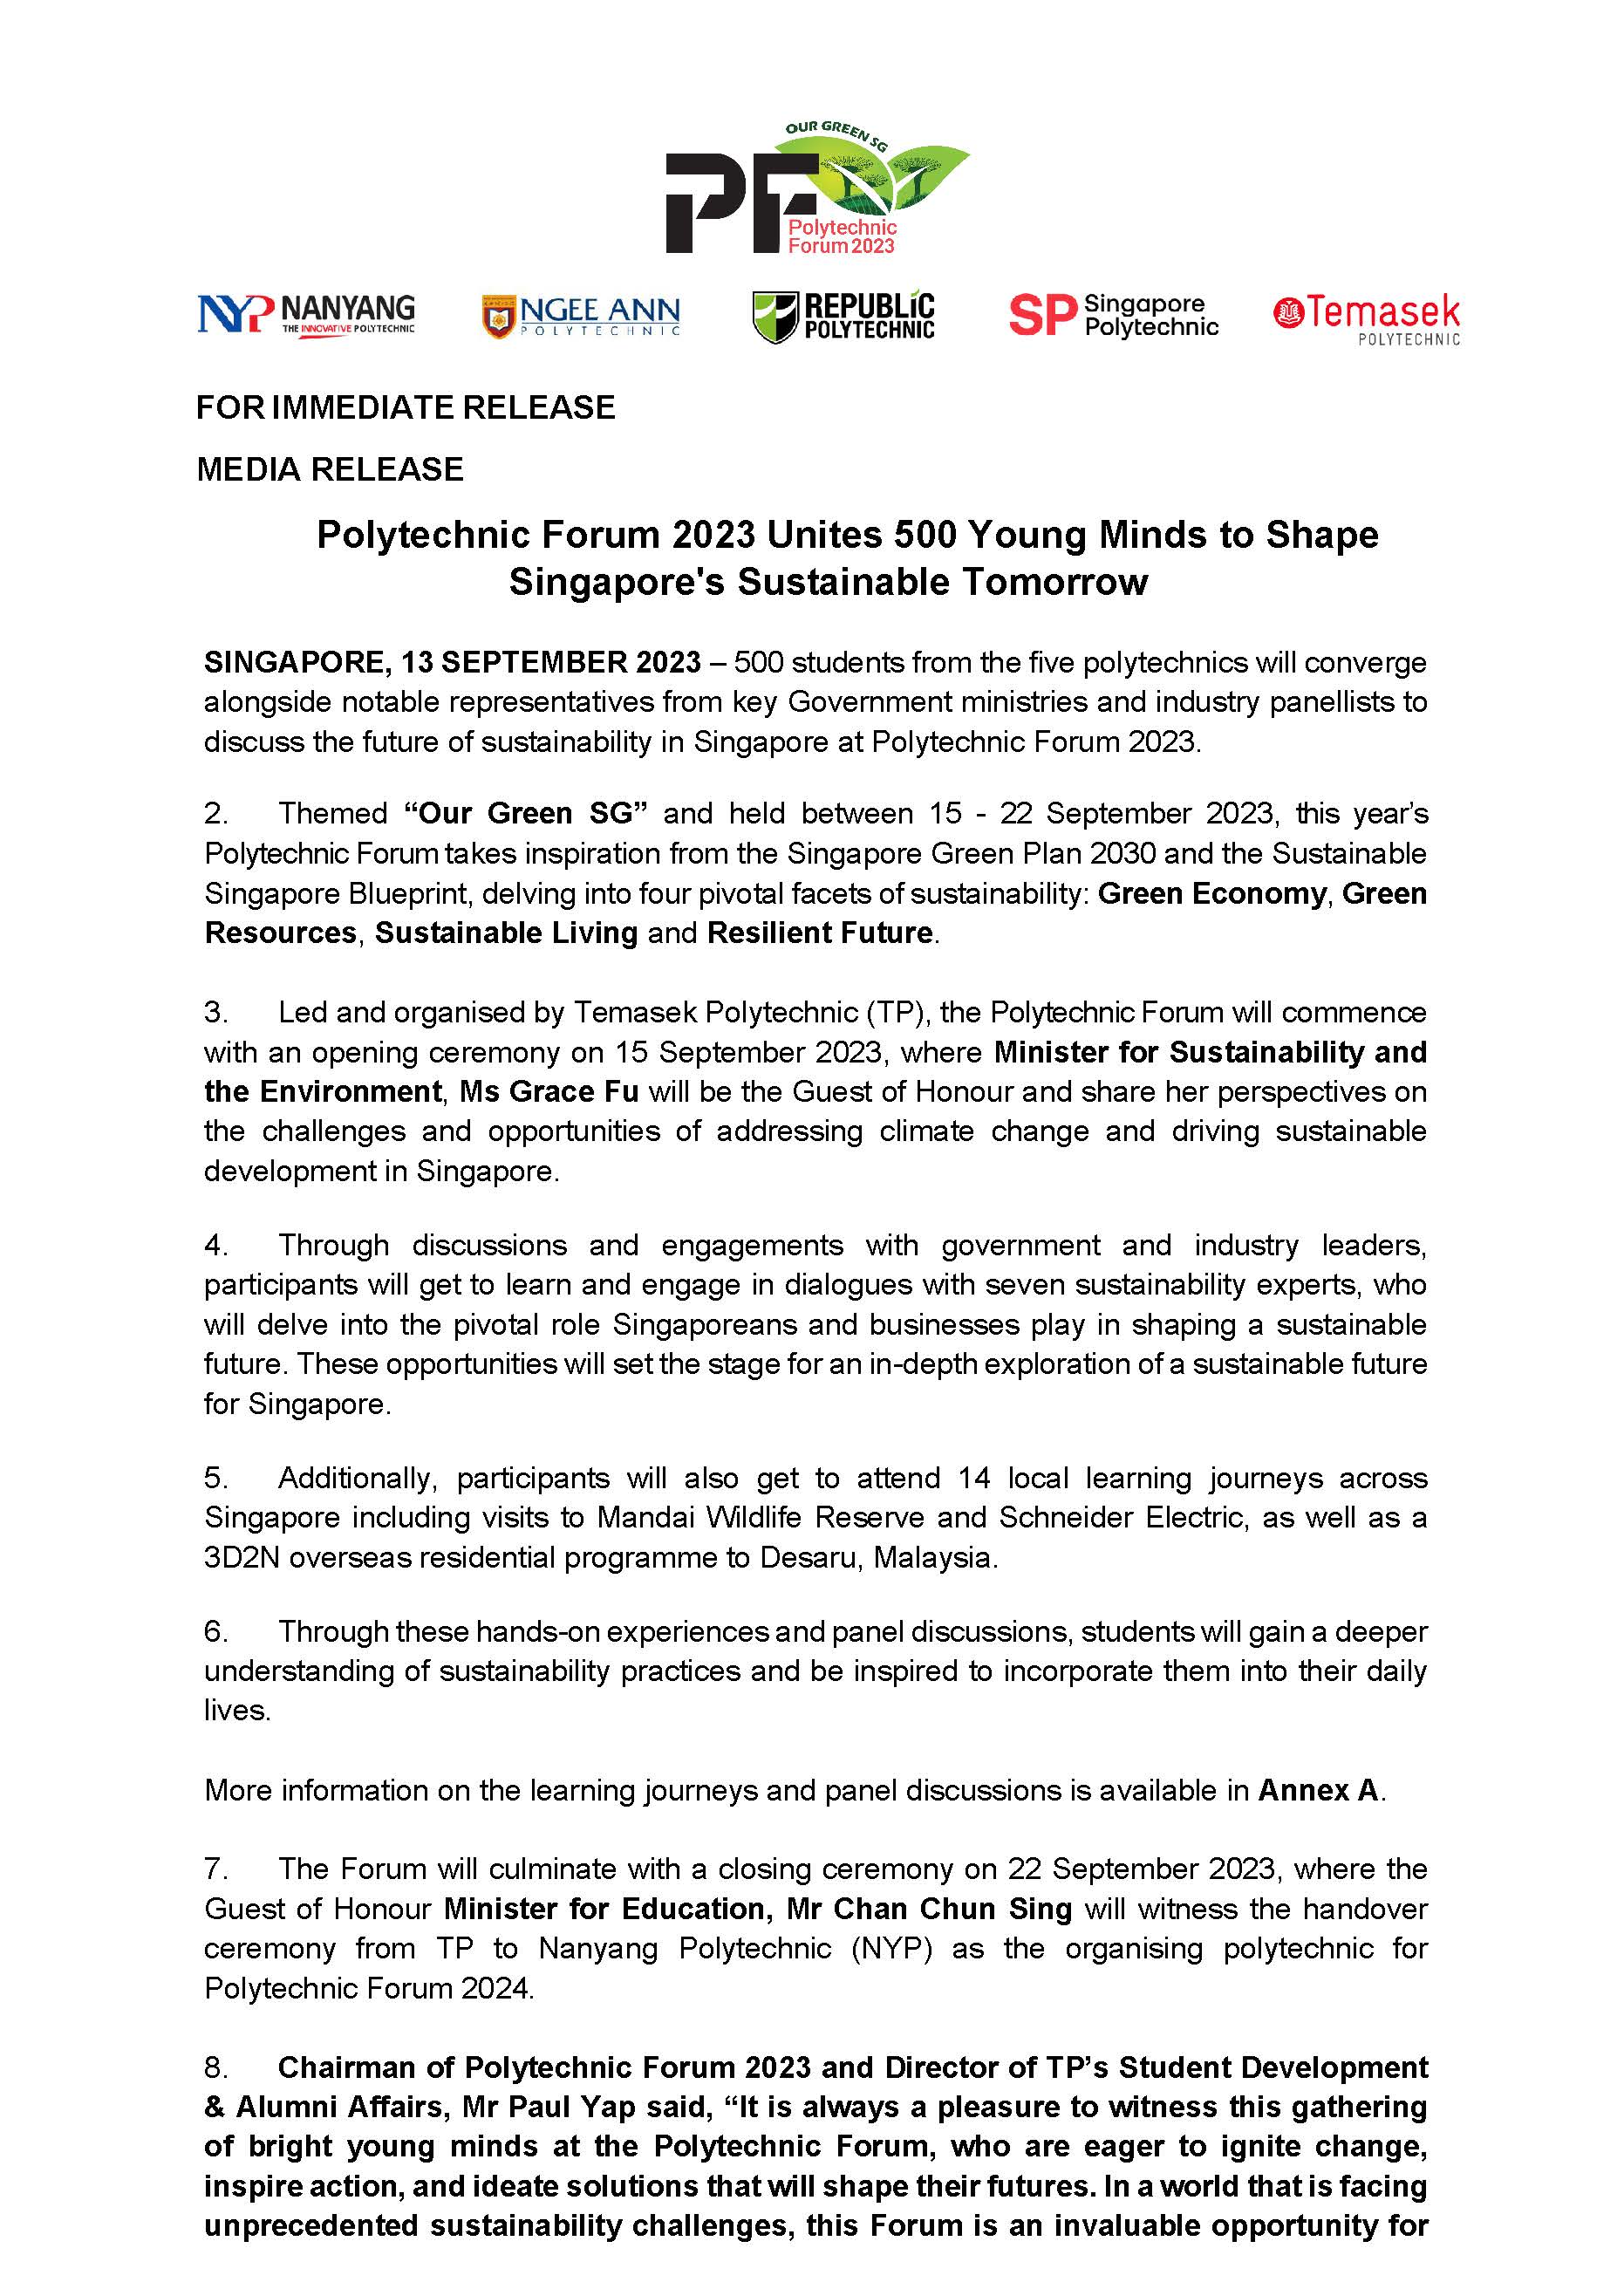 Polytechnic Forum 2023 - Media Release_Page_1